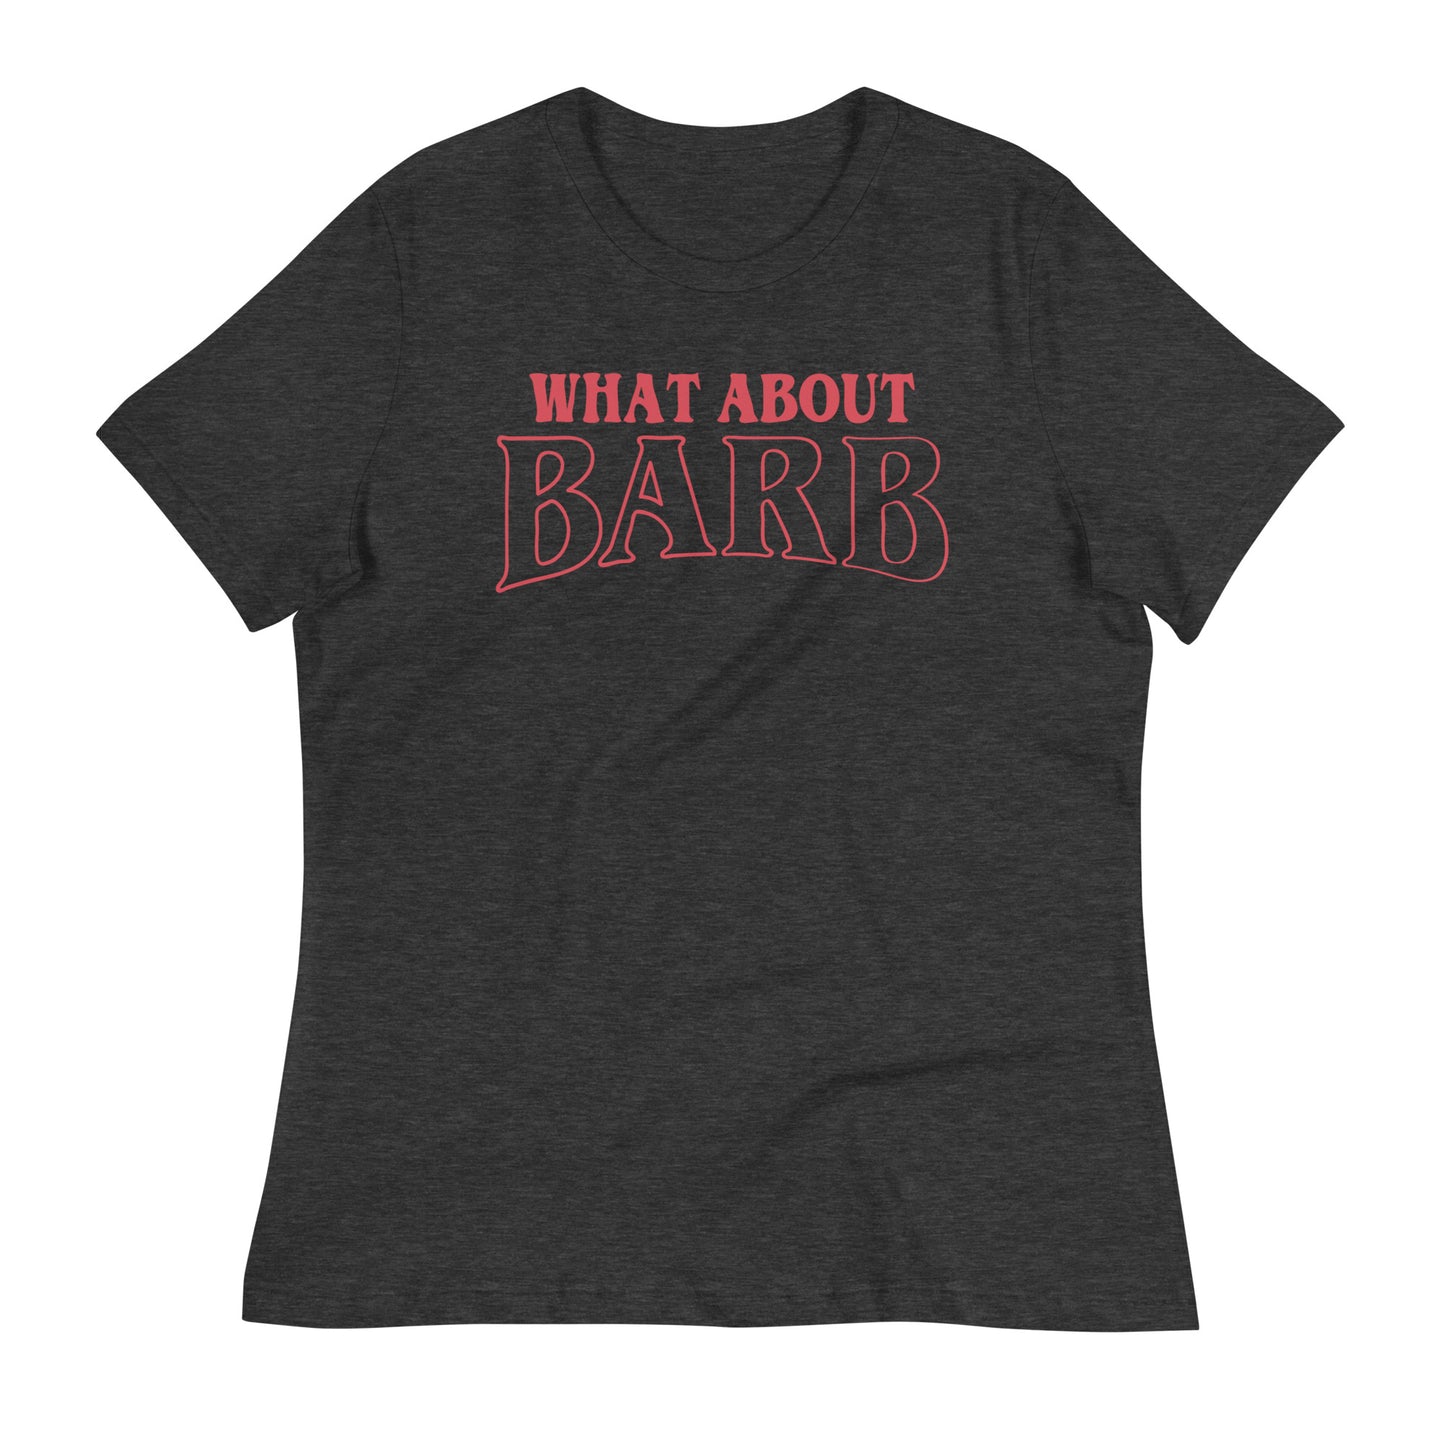 What About Barb? Women's Signature Tee